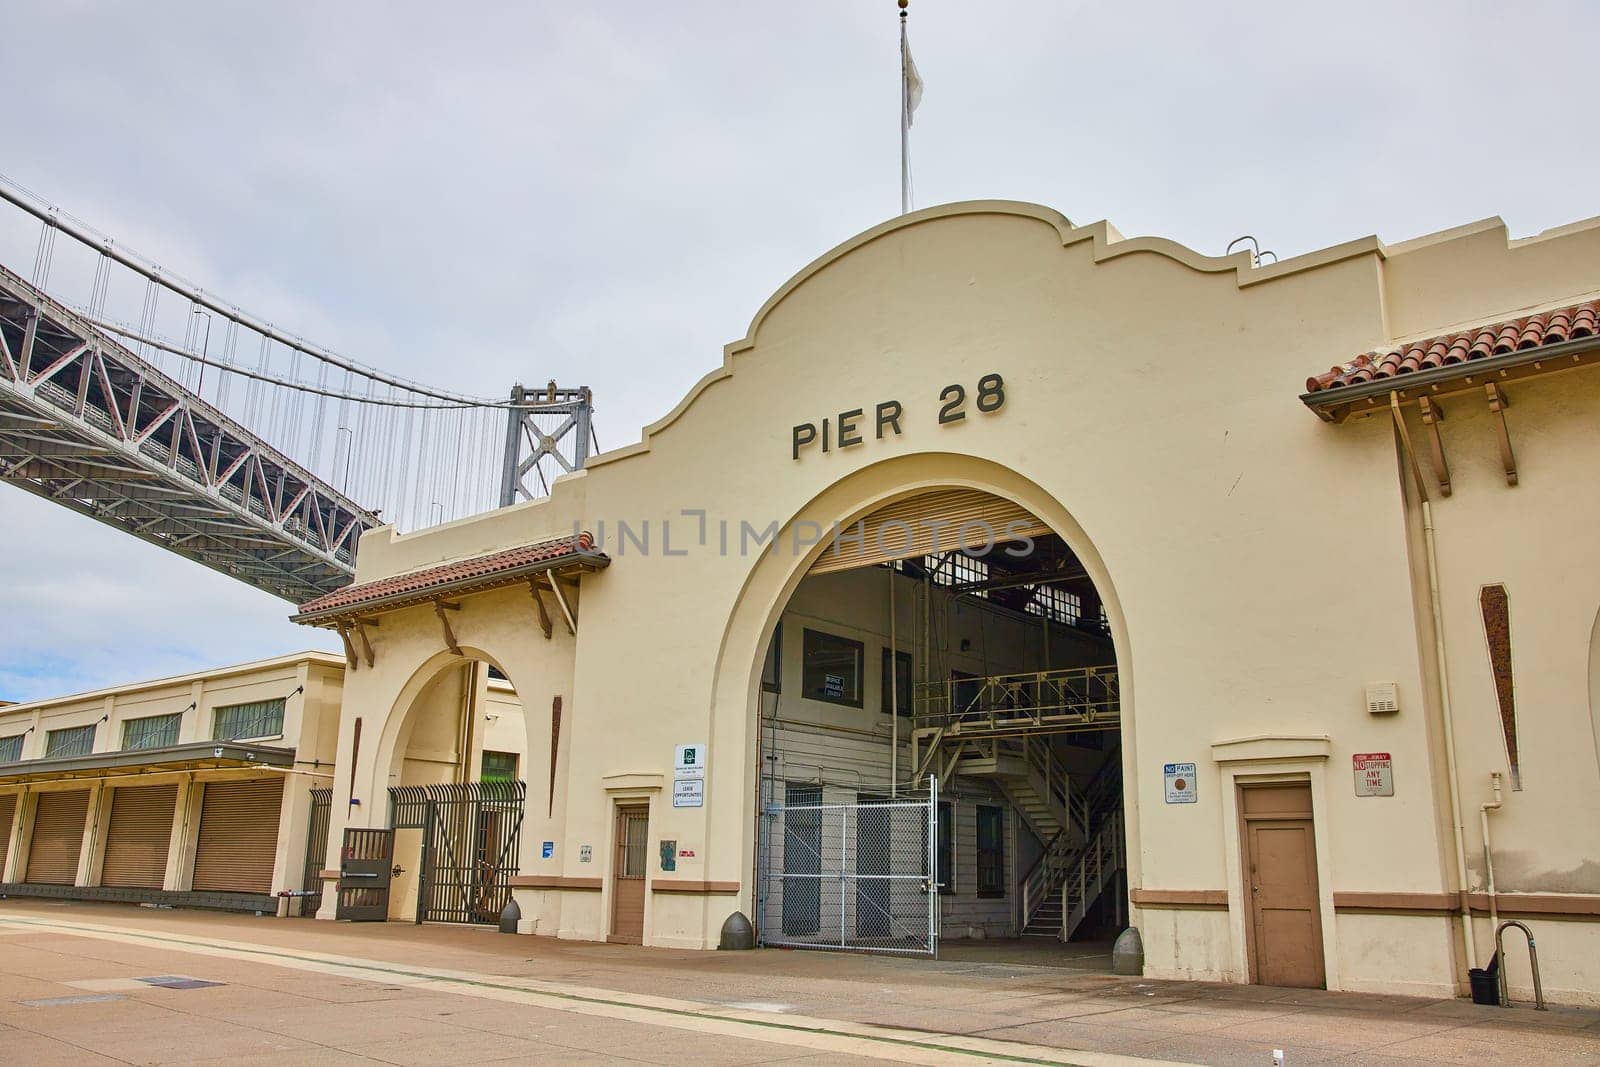 Image of Pier 28 arch entrance to building with staircase inside and Oakland Bay Bridge overhead